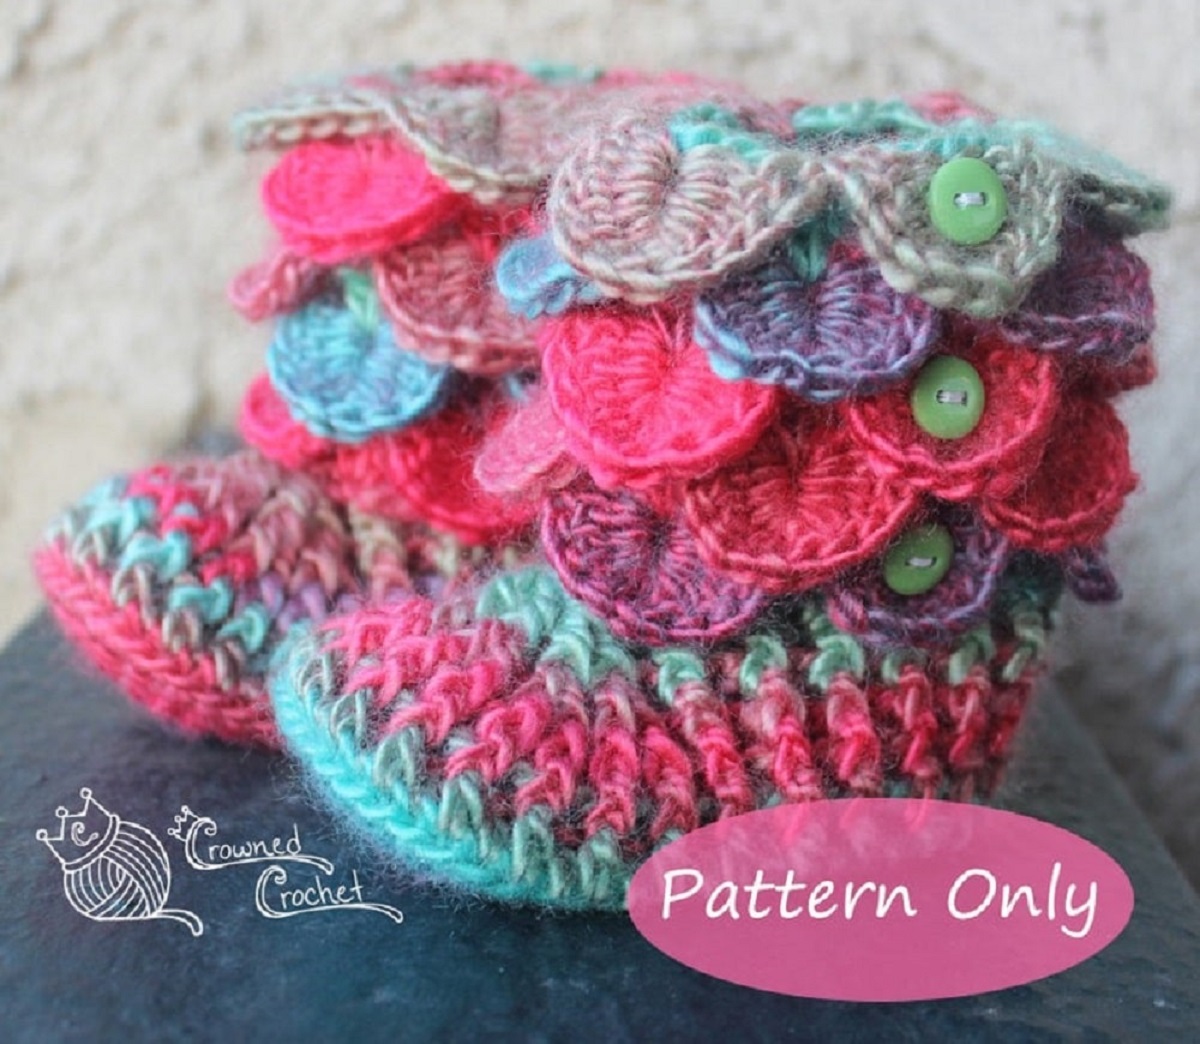 Multicolored baby booties with crochet fins from the ankle up to the top of the boot and green buttons down the side.